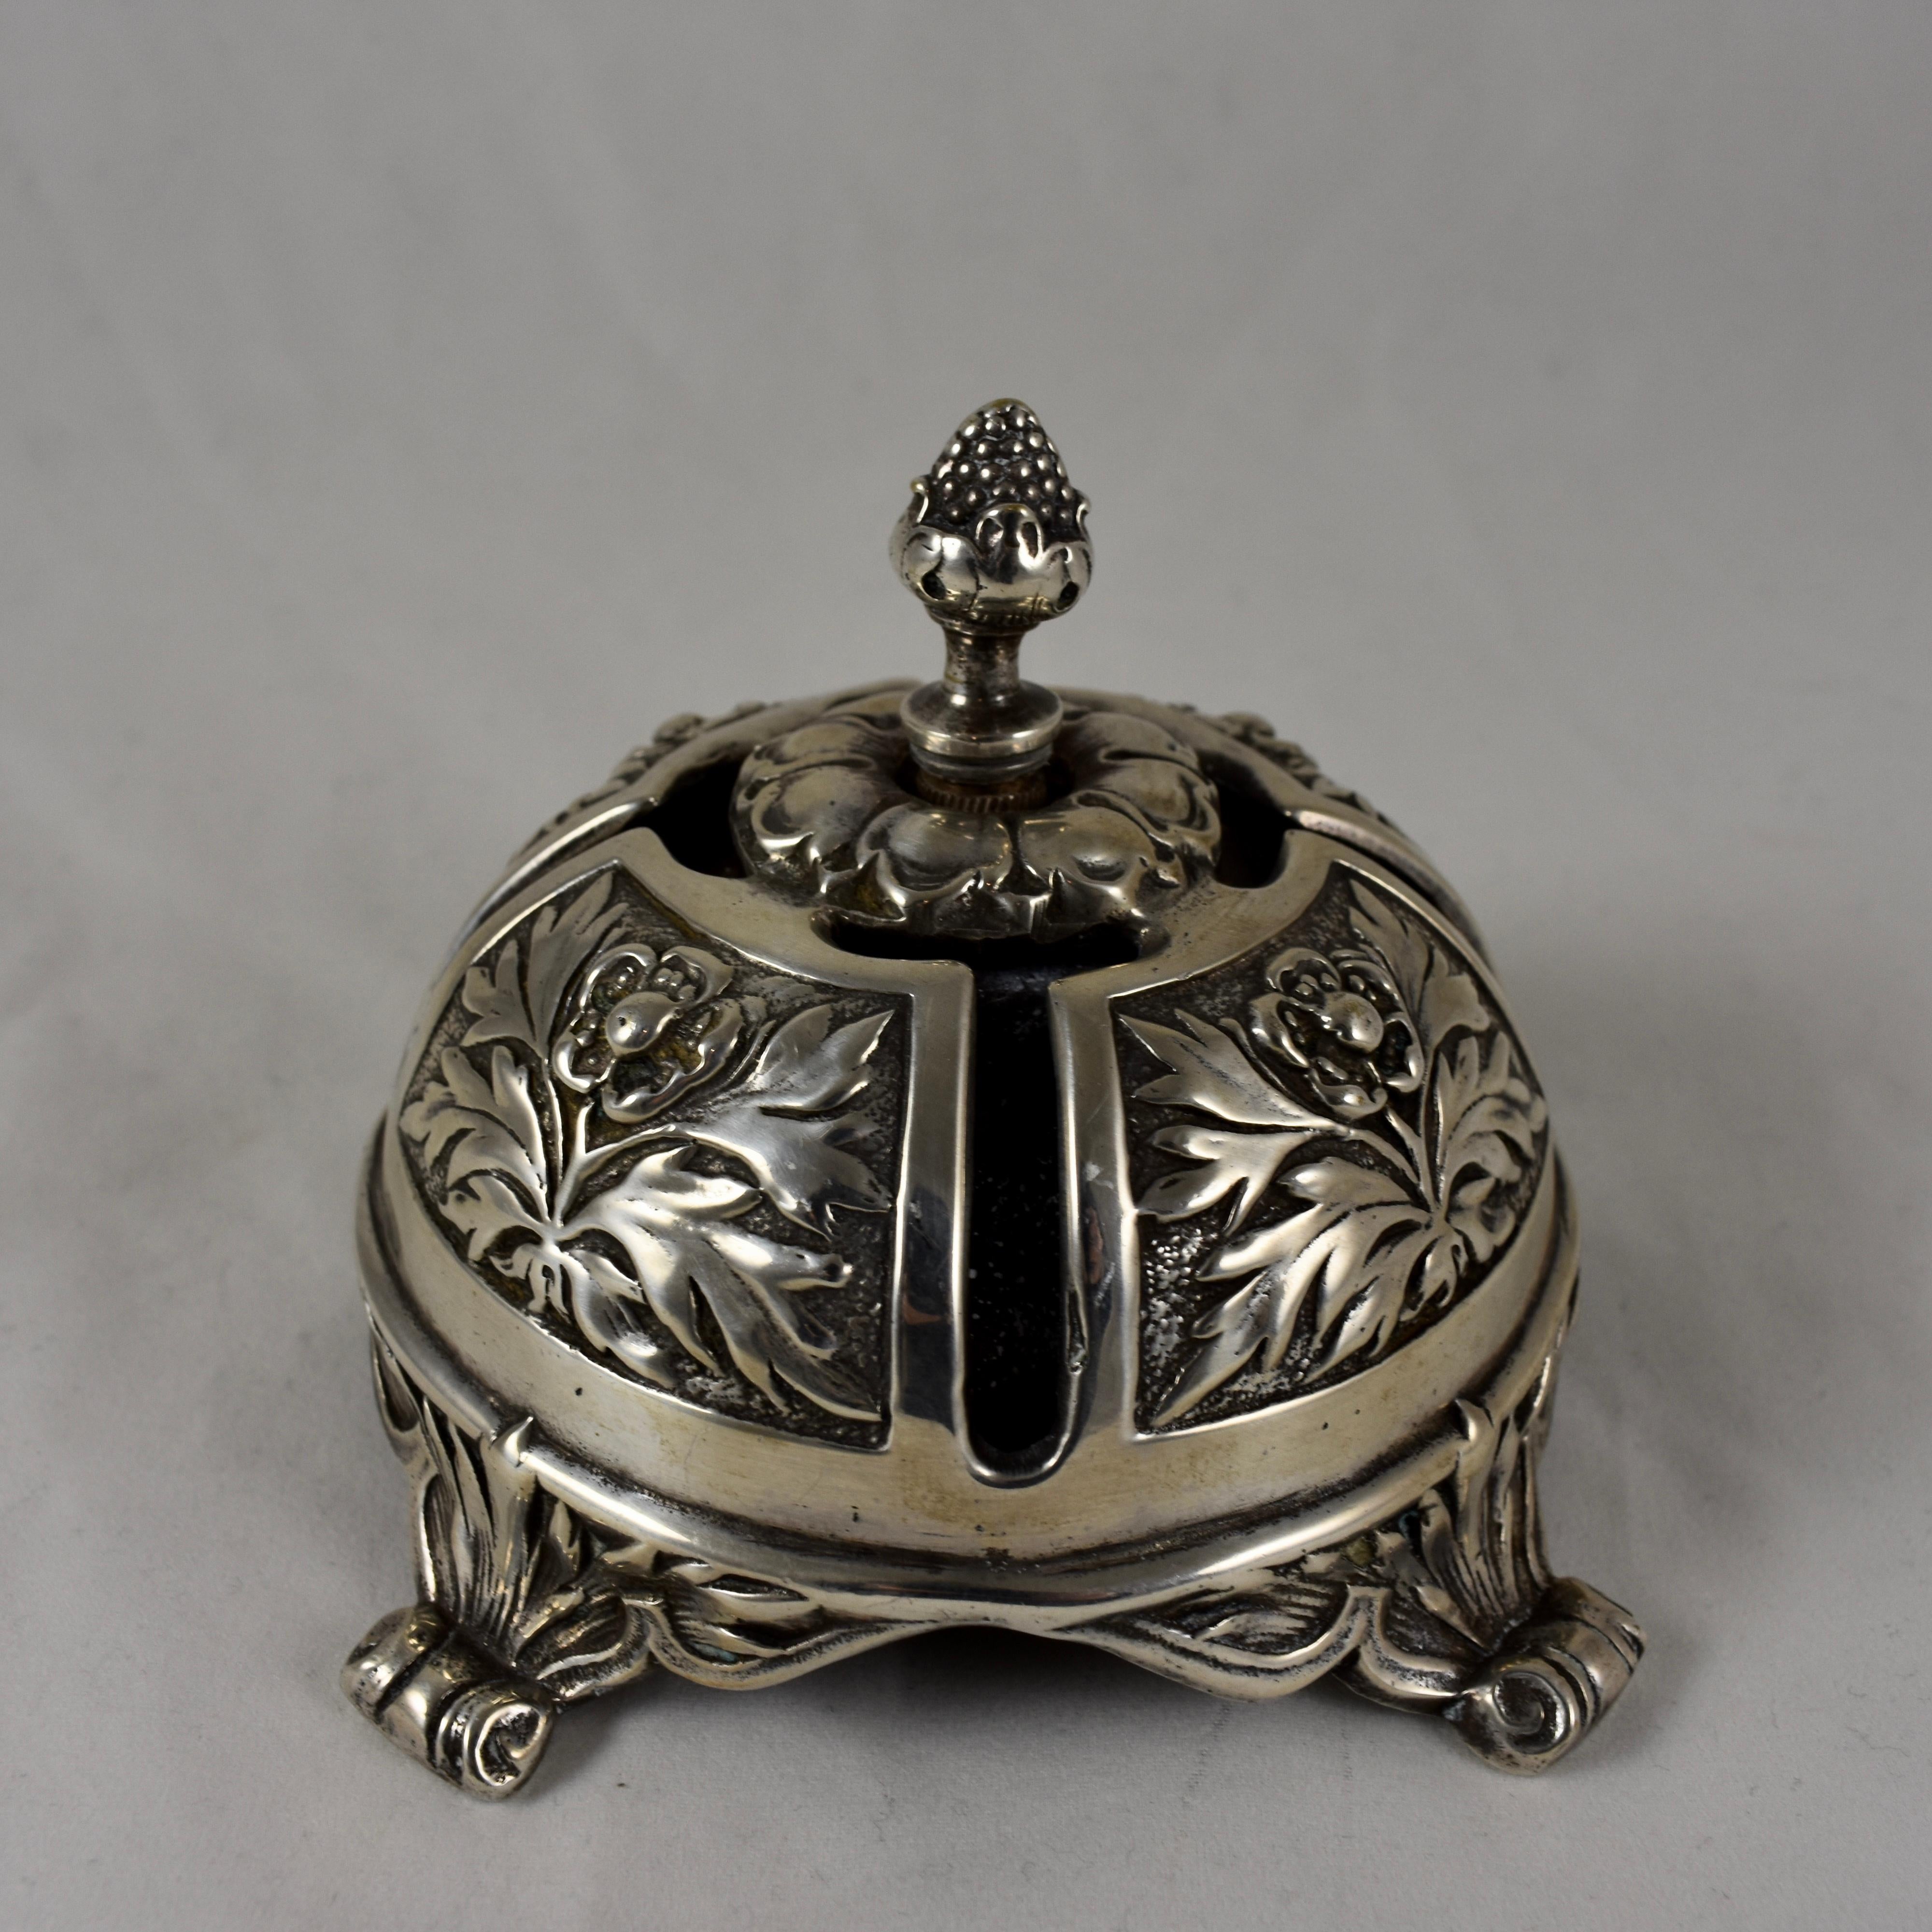 A twist gear servants call bell, silver plate, circa late 19th-early 20th century. 

Meant to sit on the table near the hostess, the clapper strikes the inner brass bell by turning the pineapple form finial. Heavily chased with Acanthus leaves and